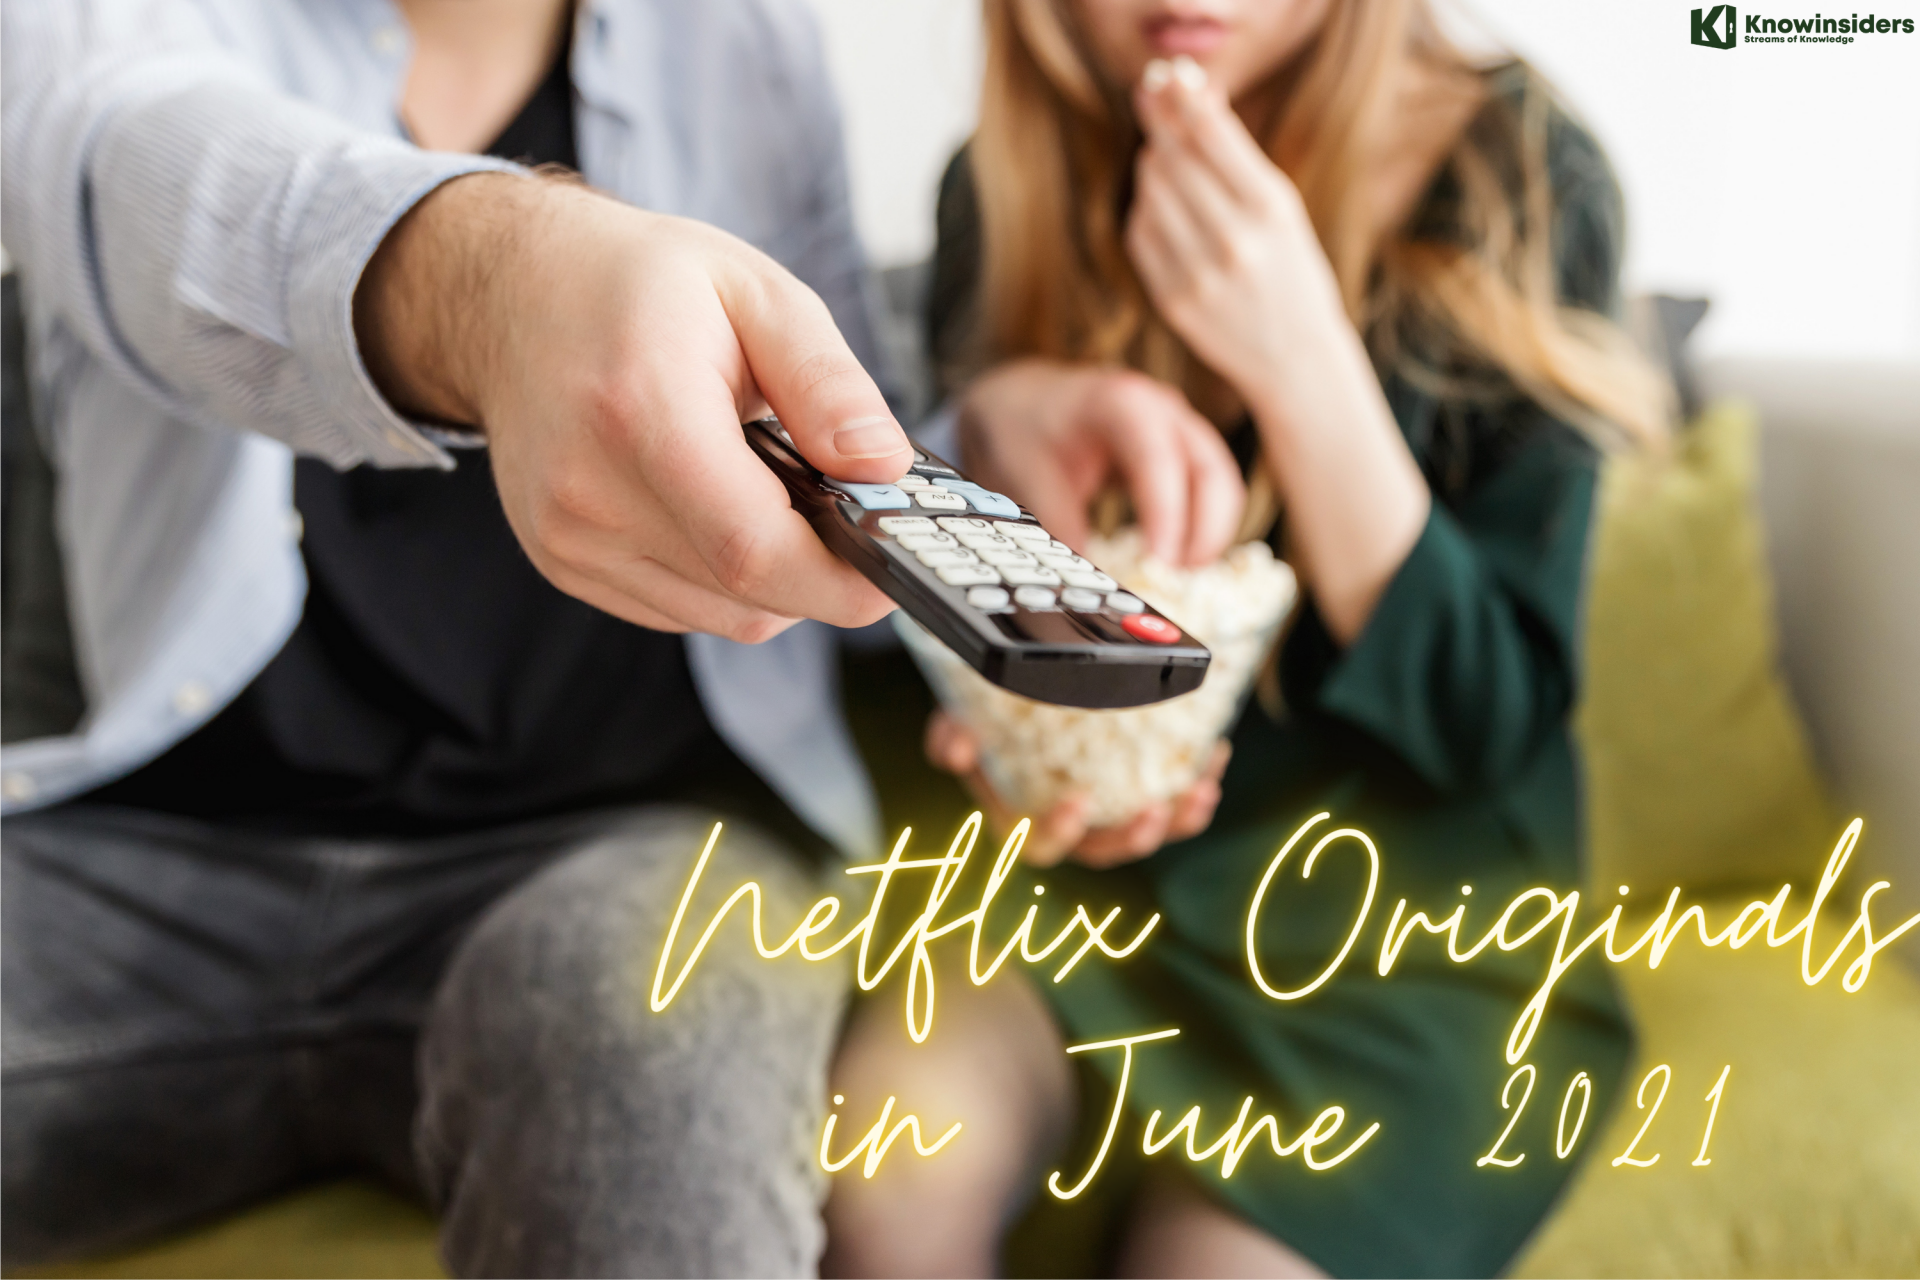 What’s Coming on Netflix Originals this June?